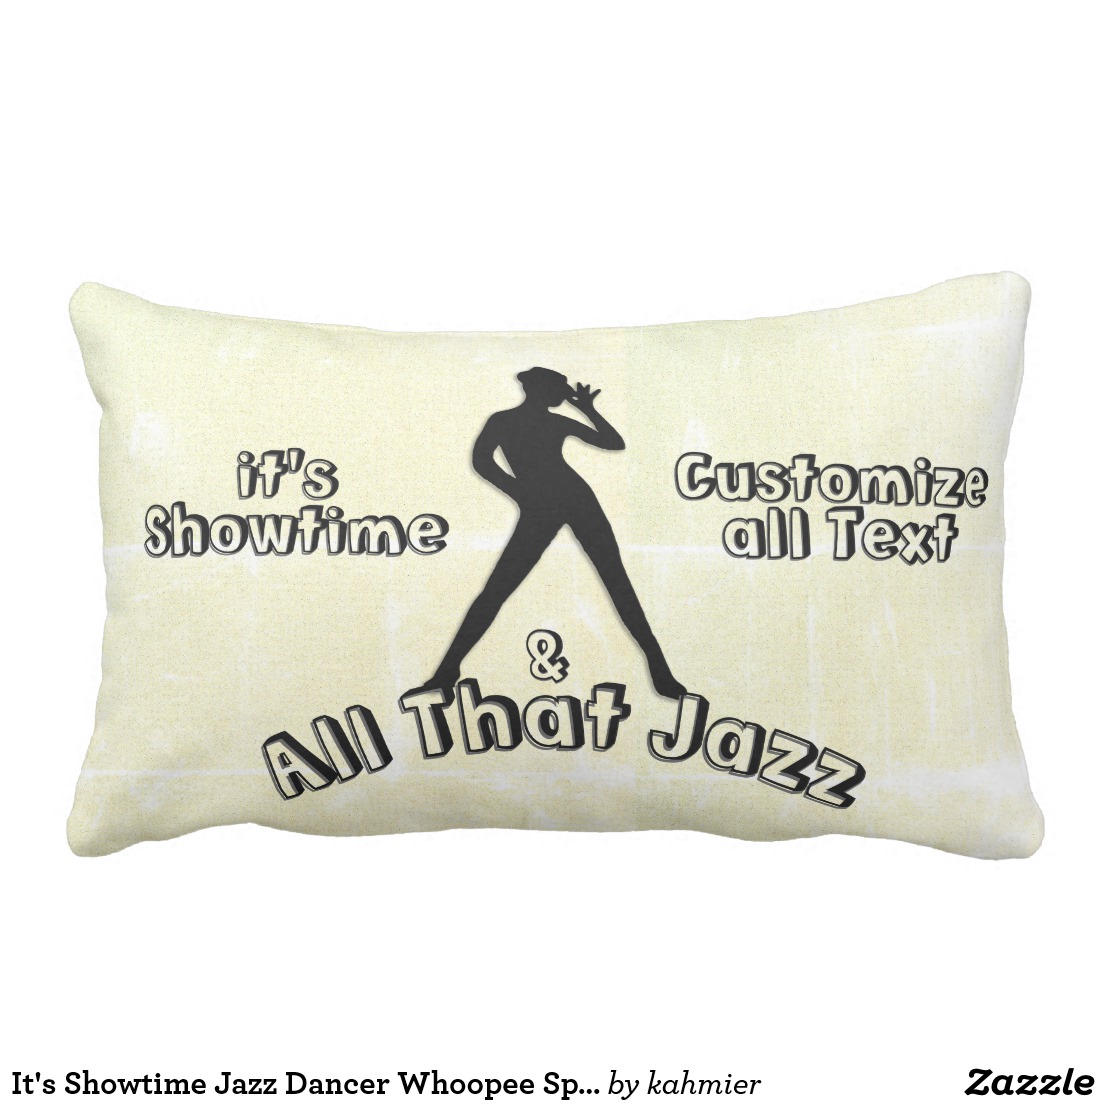 It's Showtime Jazz Dancer Whoopee Spot Cushion